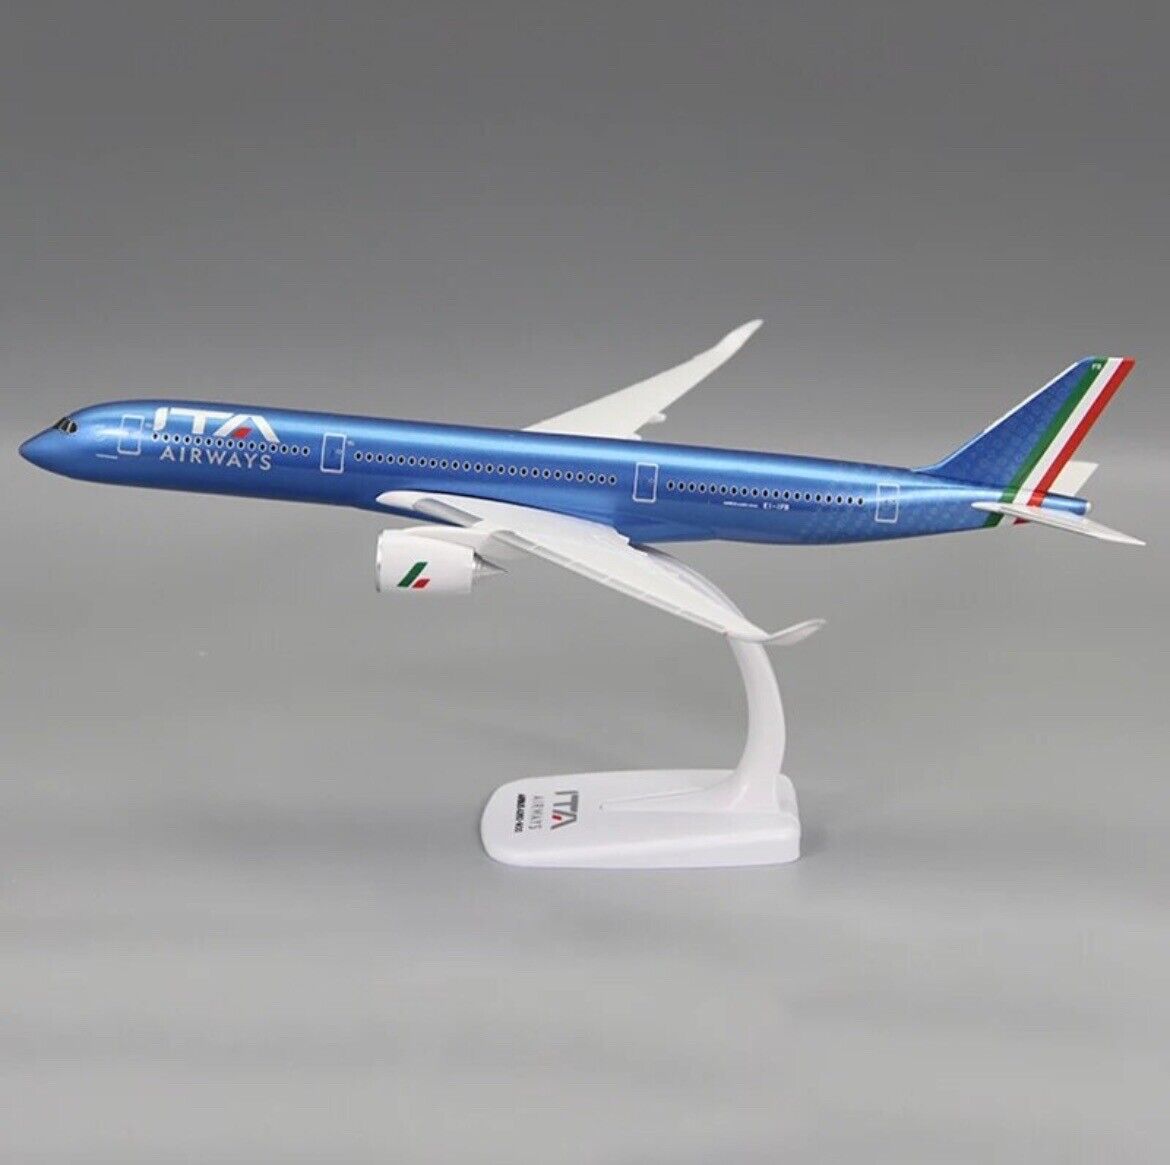 1/200 Scale Airplane Model - ITA Airlines Airbus A350-900 Model With Stand